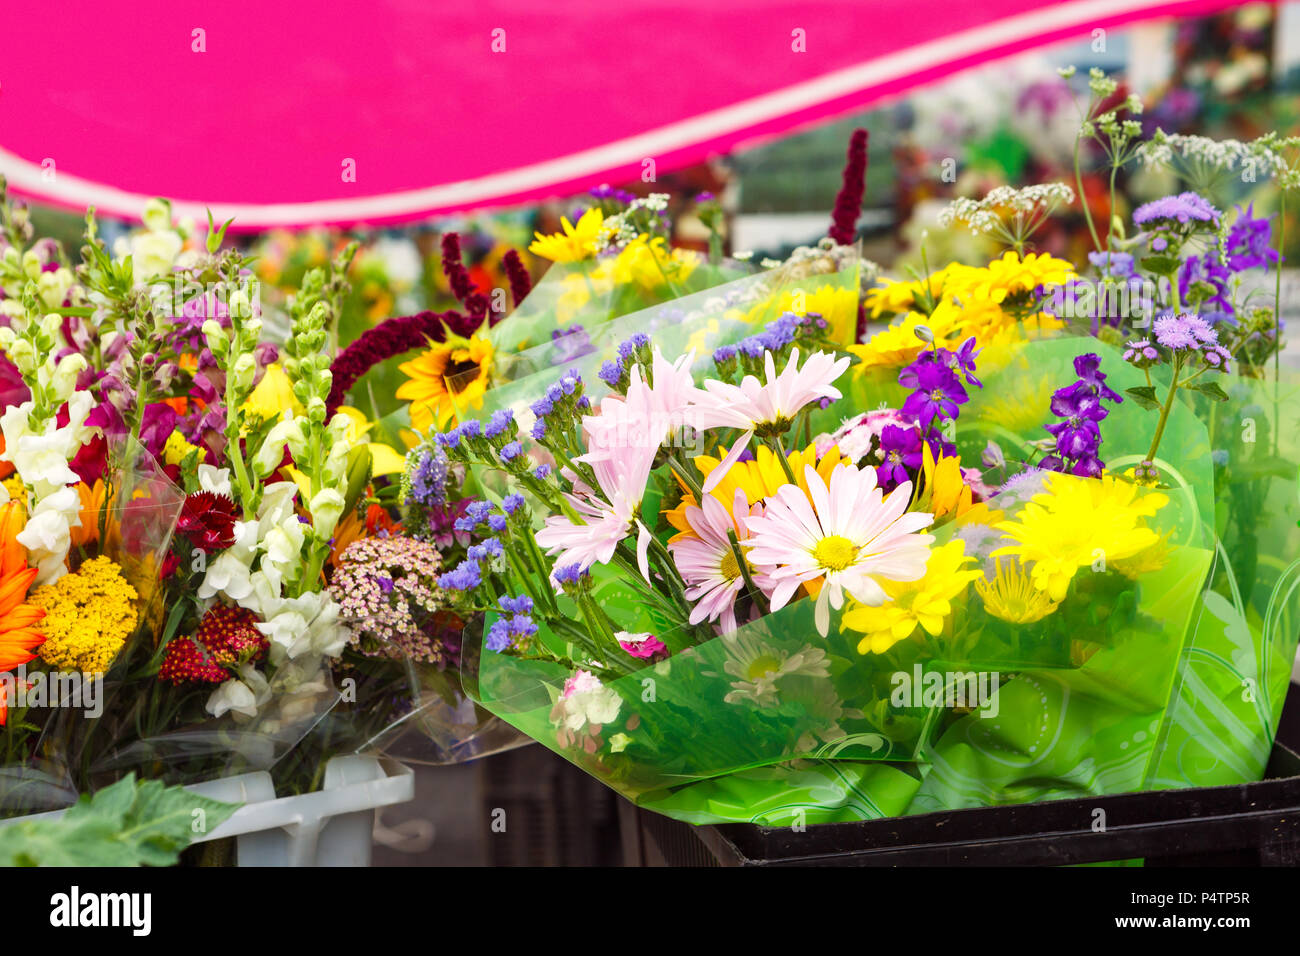 Flower Bunches for Sale at a Local Market Stock Photo